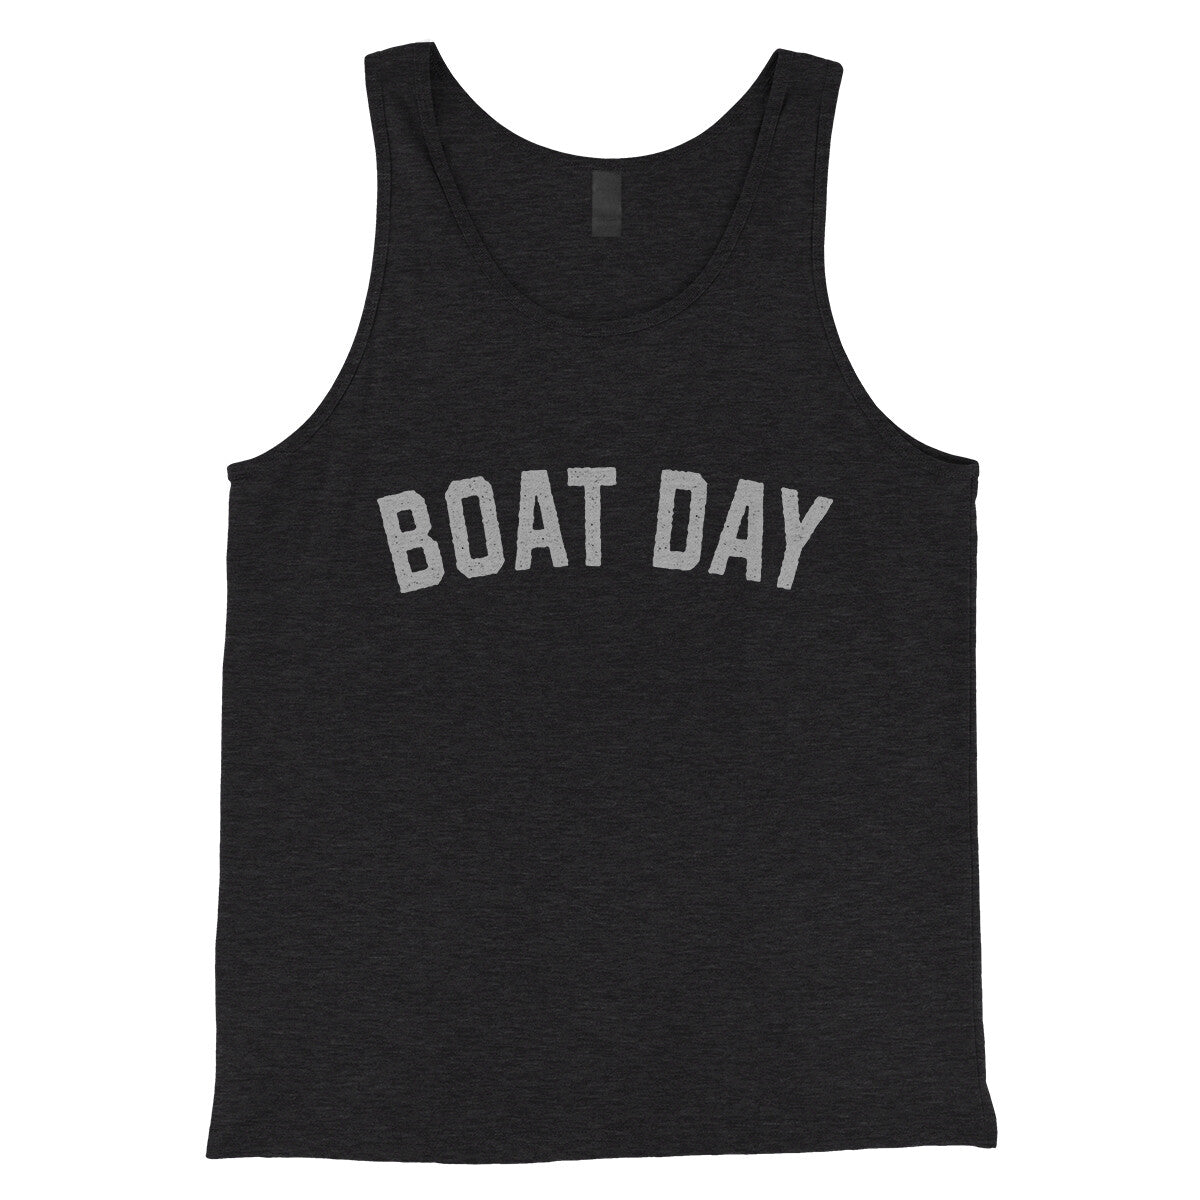 Boat Day in Charcoal Black TriBlend Color